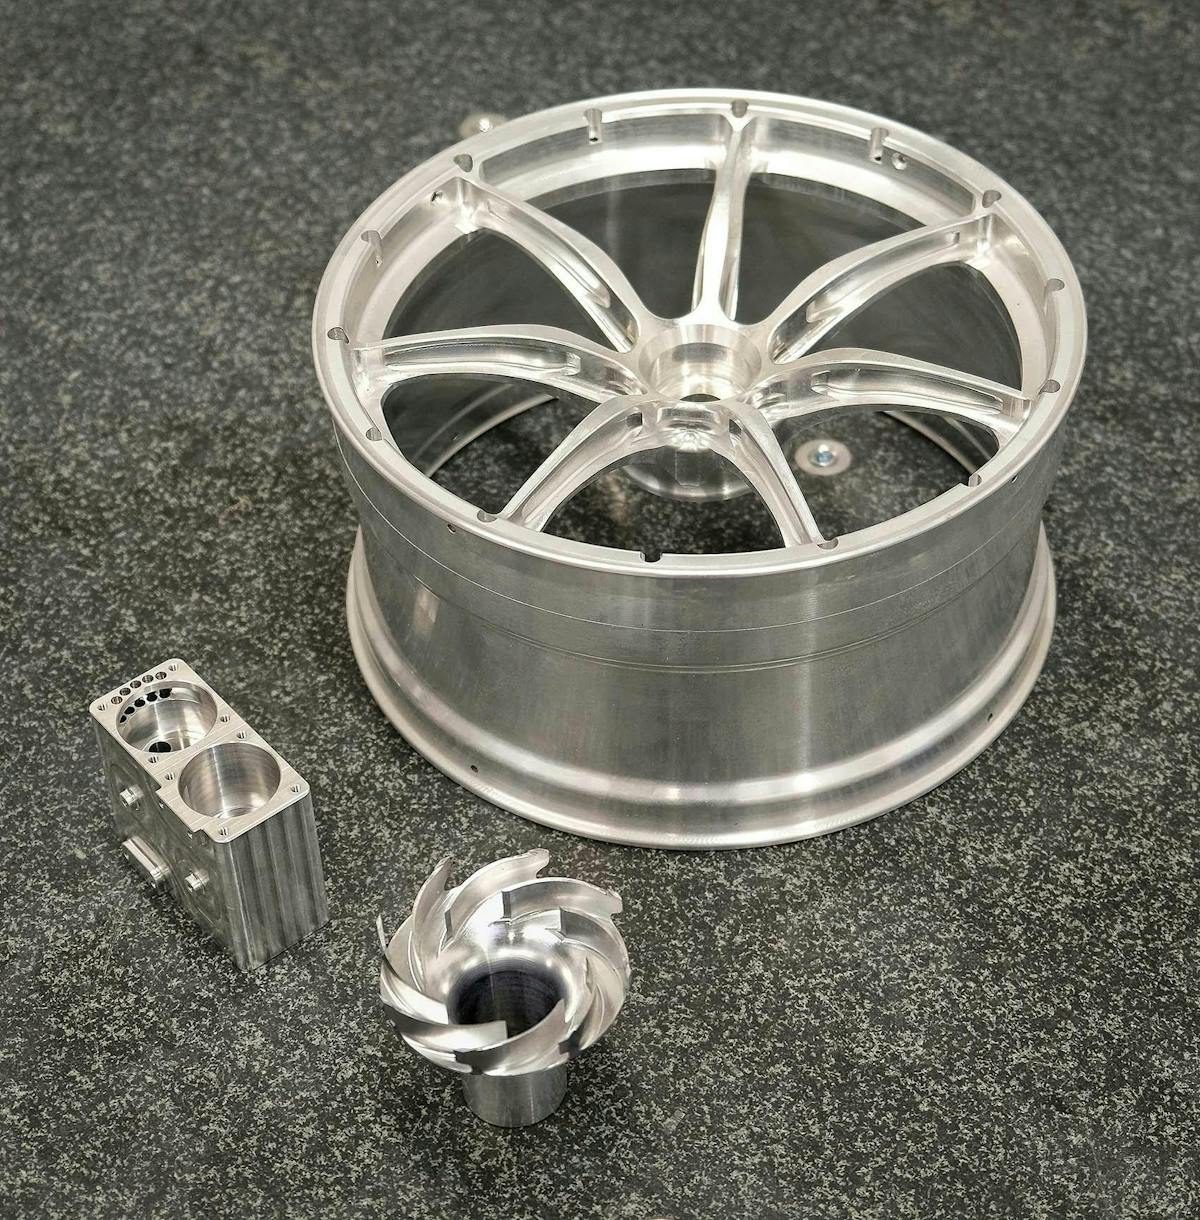 Typical components, all machined from solid aluminum, inspected by Driven Engineering on the LK CMM. Clockwise from the back: the scaled-down race car wheel, an impeller, and an aircraft fuel pump component.